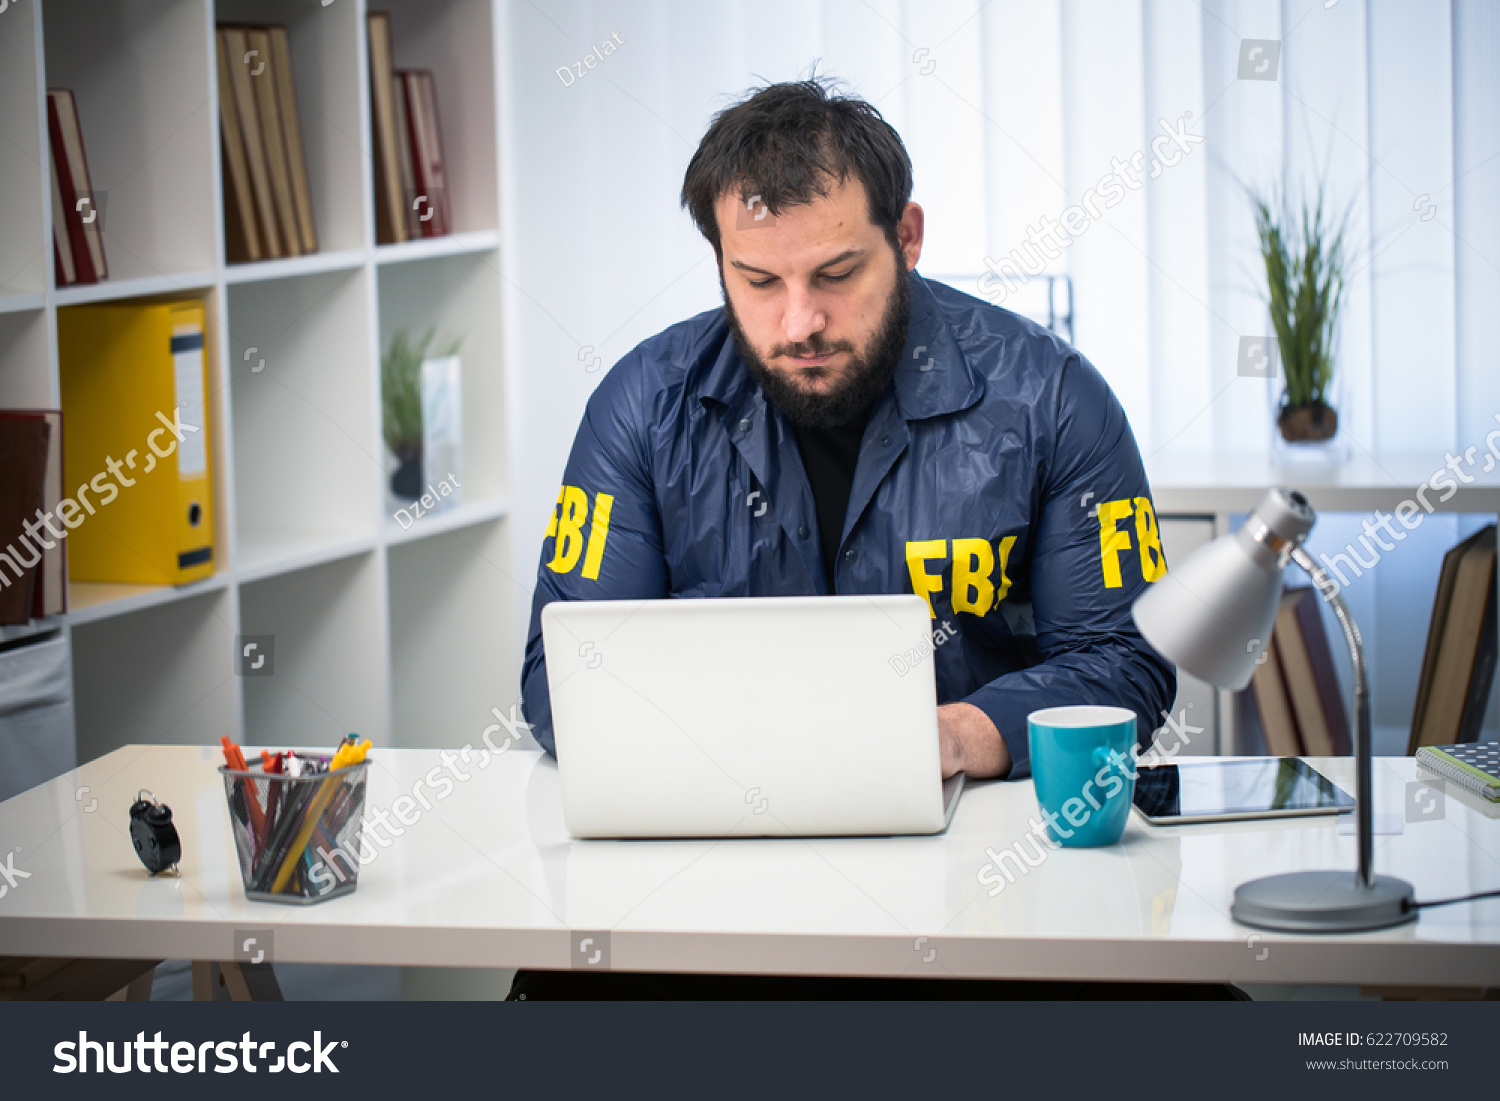 stock-photo-man-fbi-agent-working-in-his-office-on-computer-alone-622709582.jpg